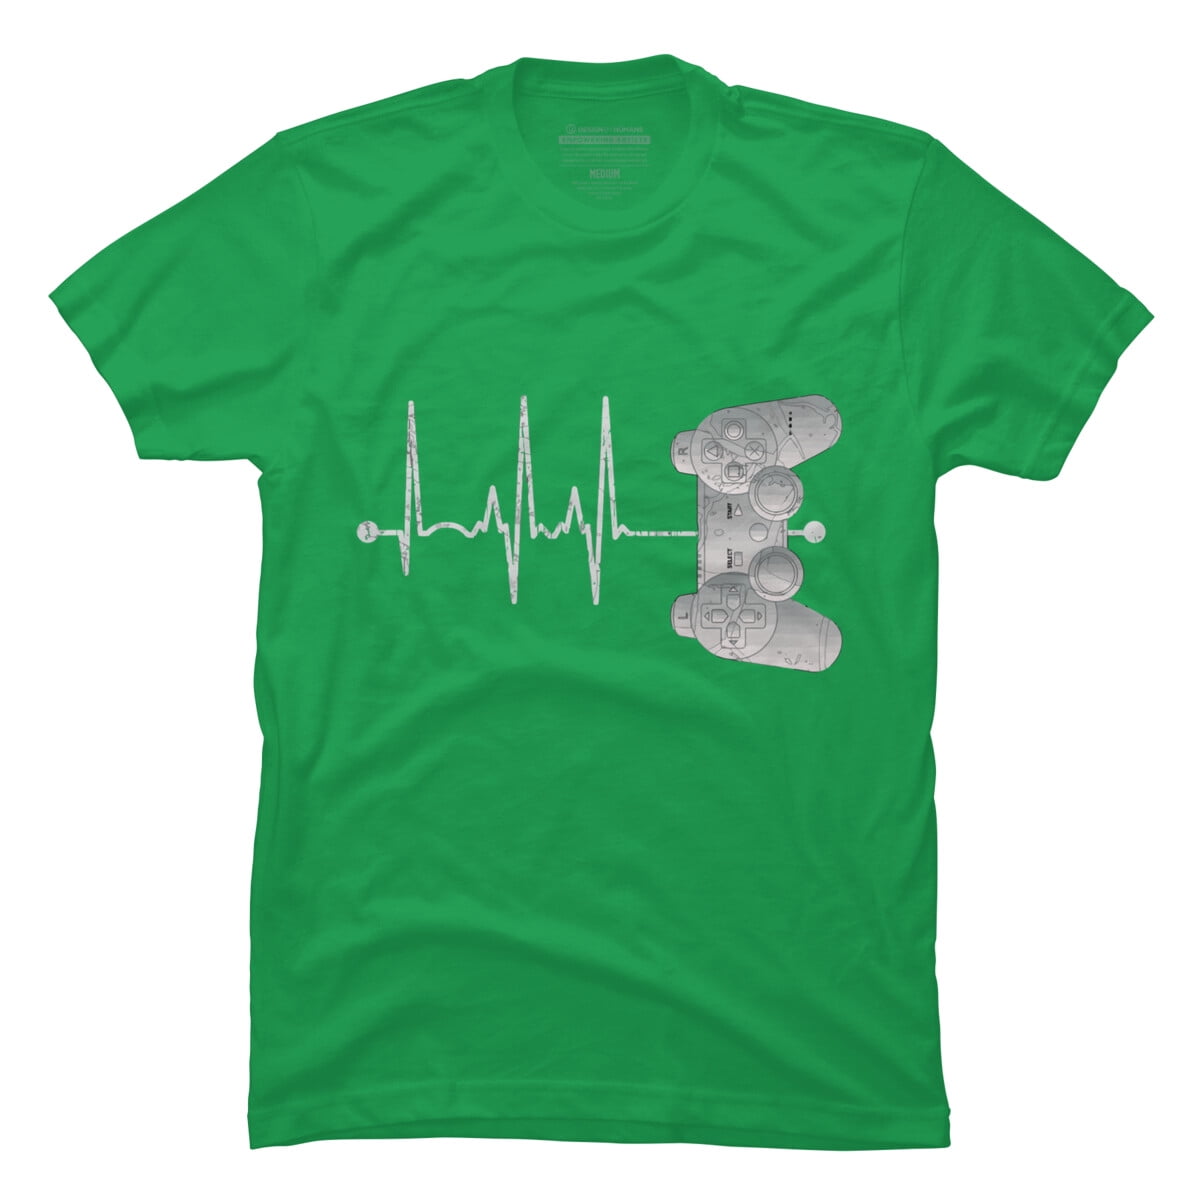 Gamer Heartbeat Teenage Boys Gifts Ideas Gaming Mens Kelly Green Graphic Tee - Design By Humans  XL